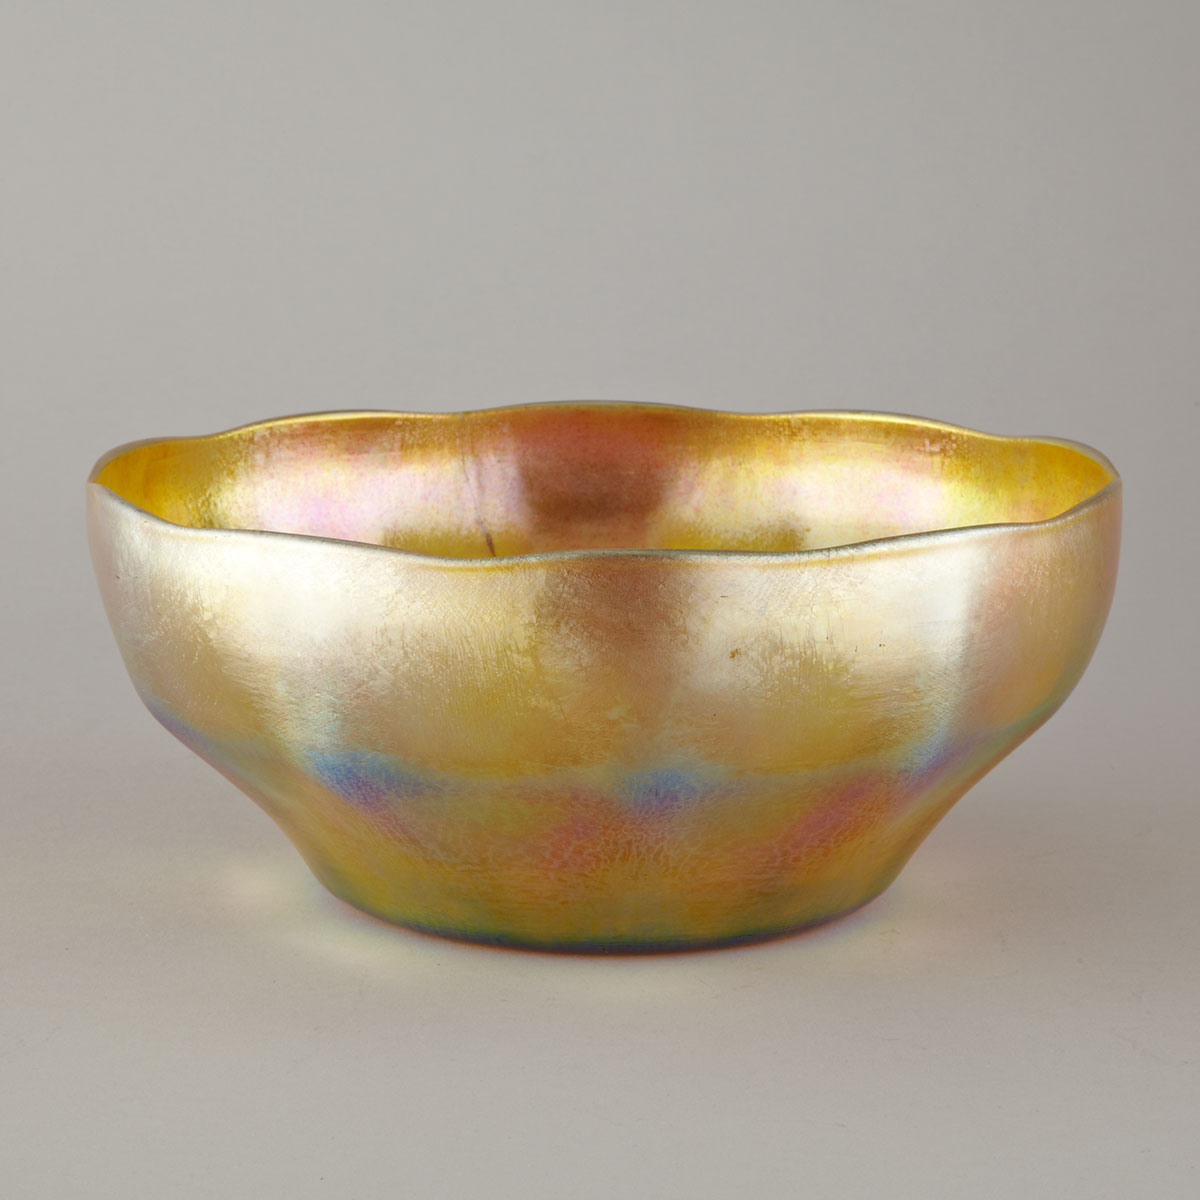 Tiffany ‘Favrile’ Iridescent Glass Bowl, early 20th century